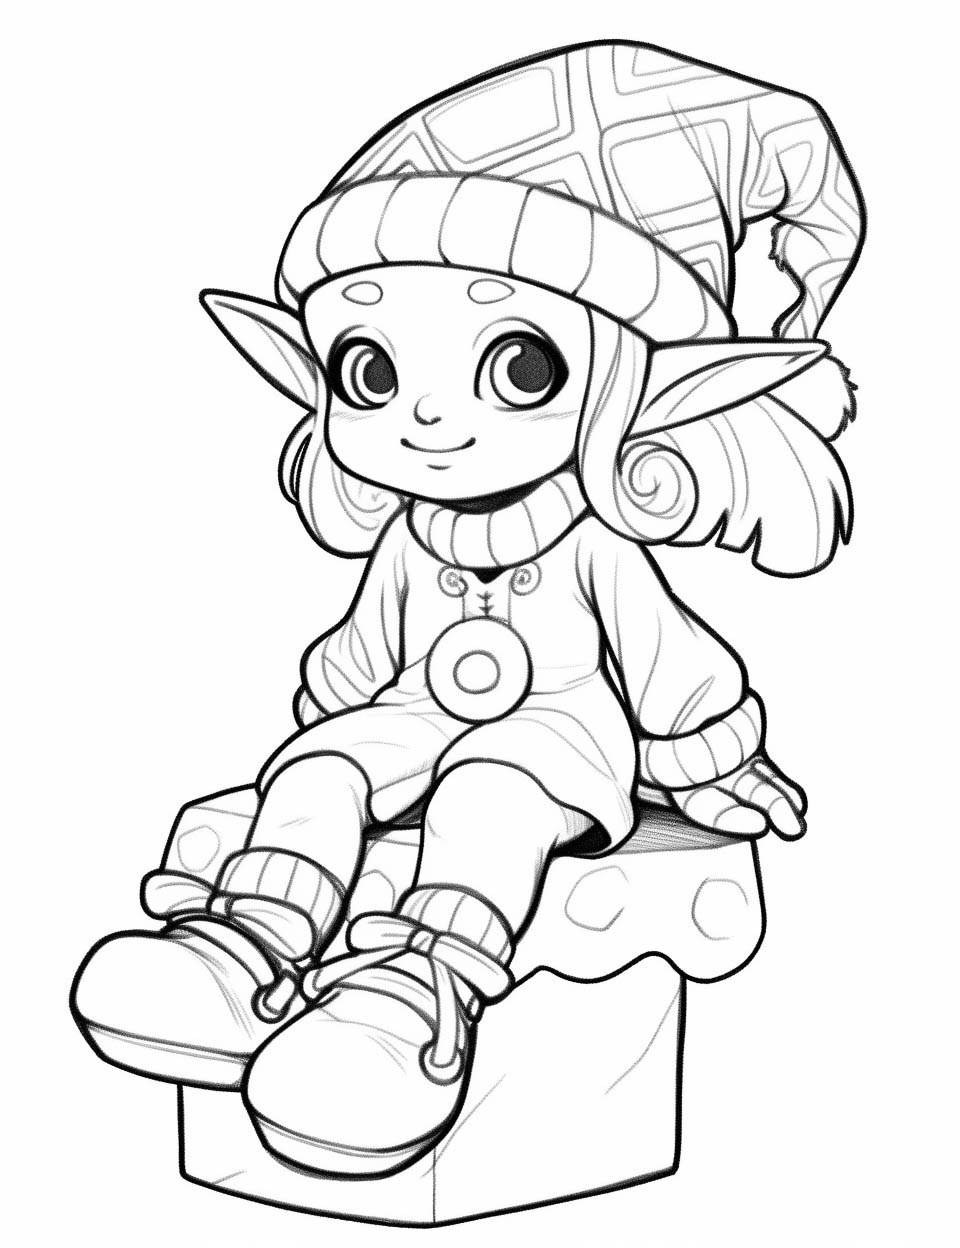 Stunning elf coloring pages for kids and adults